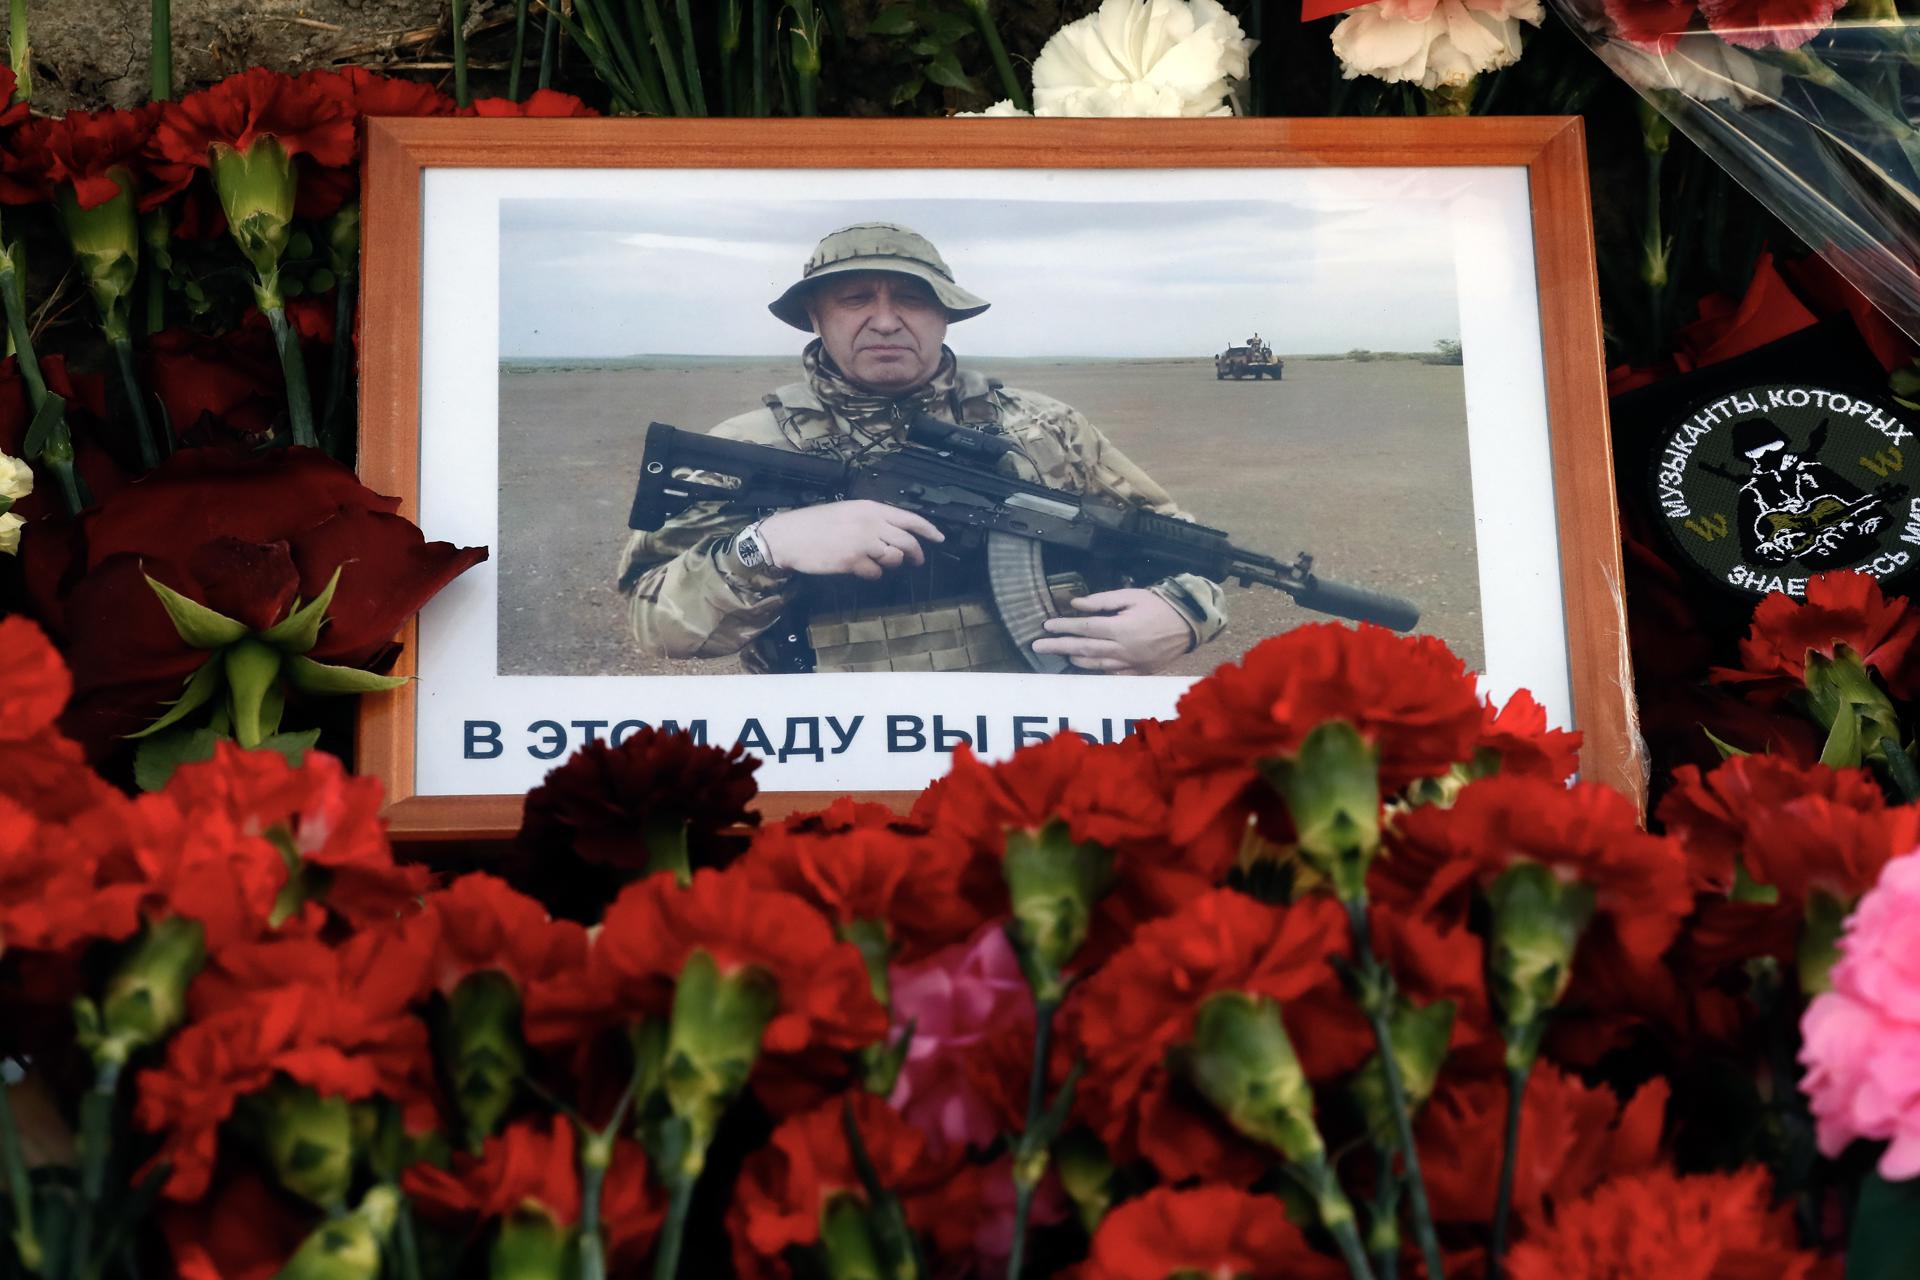 St. Petersburg (Russian Federation), 25/08/2023.- A portrait of the PMC Wagner leader Yevgeny Prigozhin, reading: 'In this hell you were the best' sits beside carnations at an informal memorial next to the former 'PMC Wagner Centre' in St. Petersburg, Russia, 25 August 2023. An investigation was launched into the crash of an aircraft in the Tver region in Russia on 23 August 2023, the Russian Federal Air Transport Agency said in a statement. Among the passengers was Wagner chief Yevgeny Prigozhin, the agency reported. (Rusia, Ucrania, San Petersburgo) EFE/EPA/ANATOLY MALTSEV